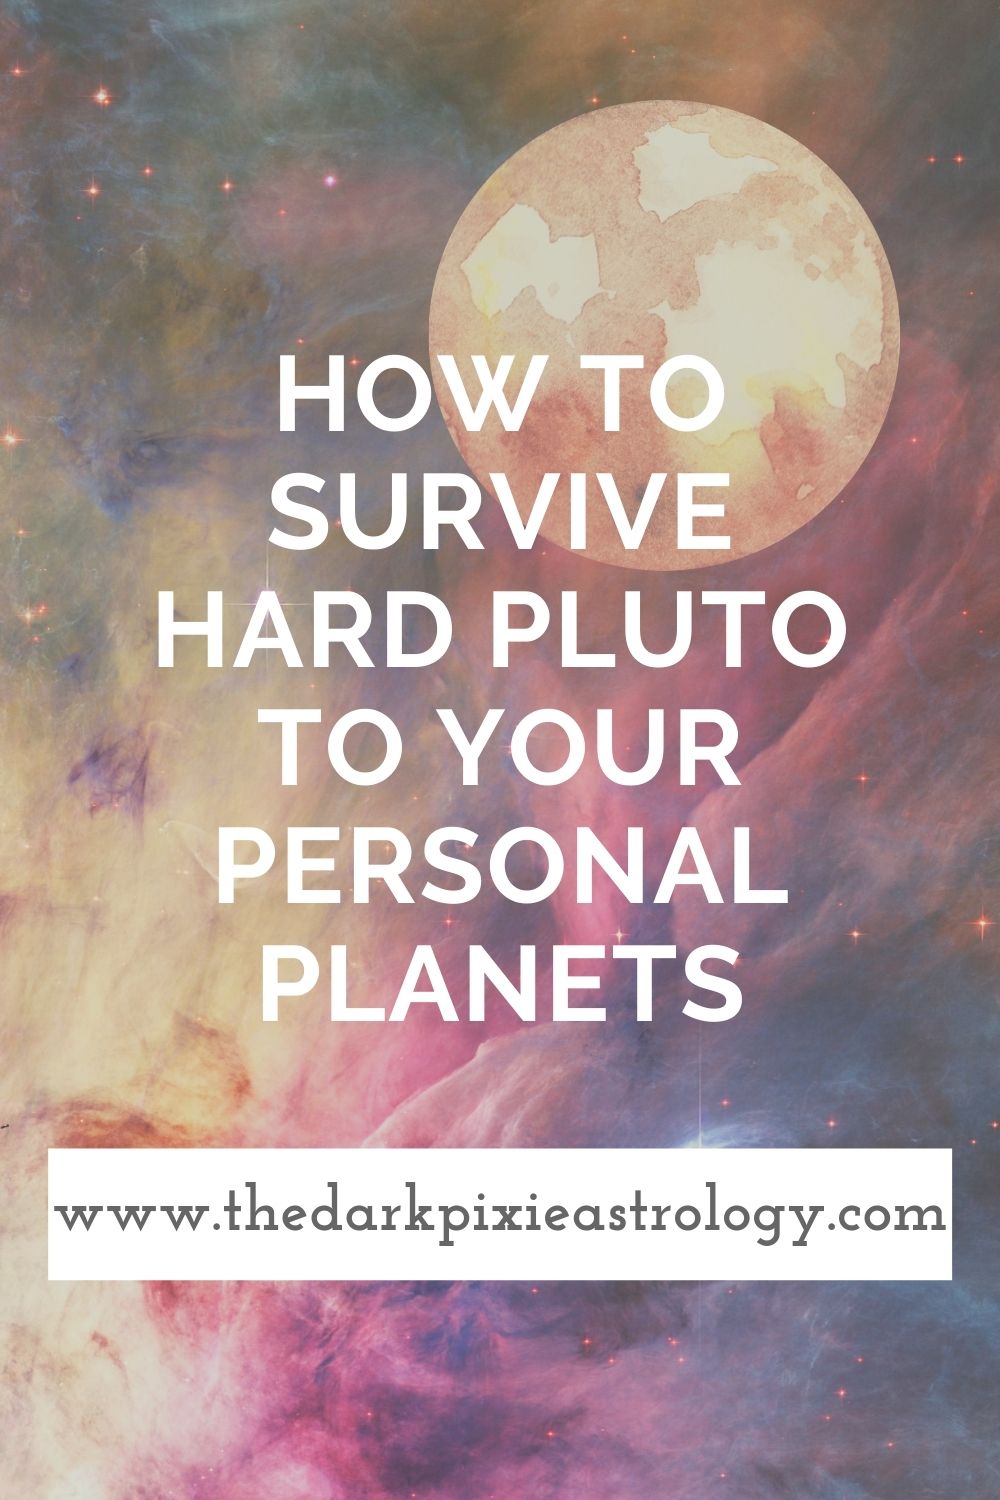 How to Survive Hard Pluto to Your Personal Planets - The Dark Pixie Astrology